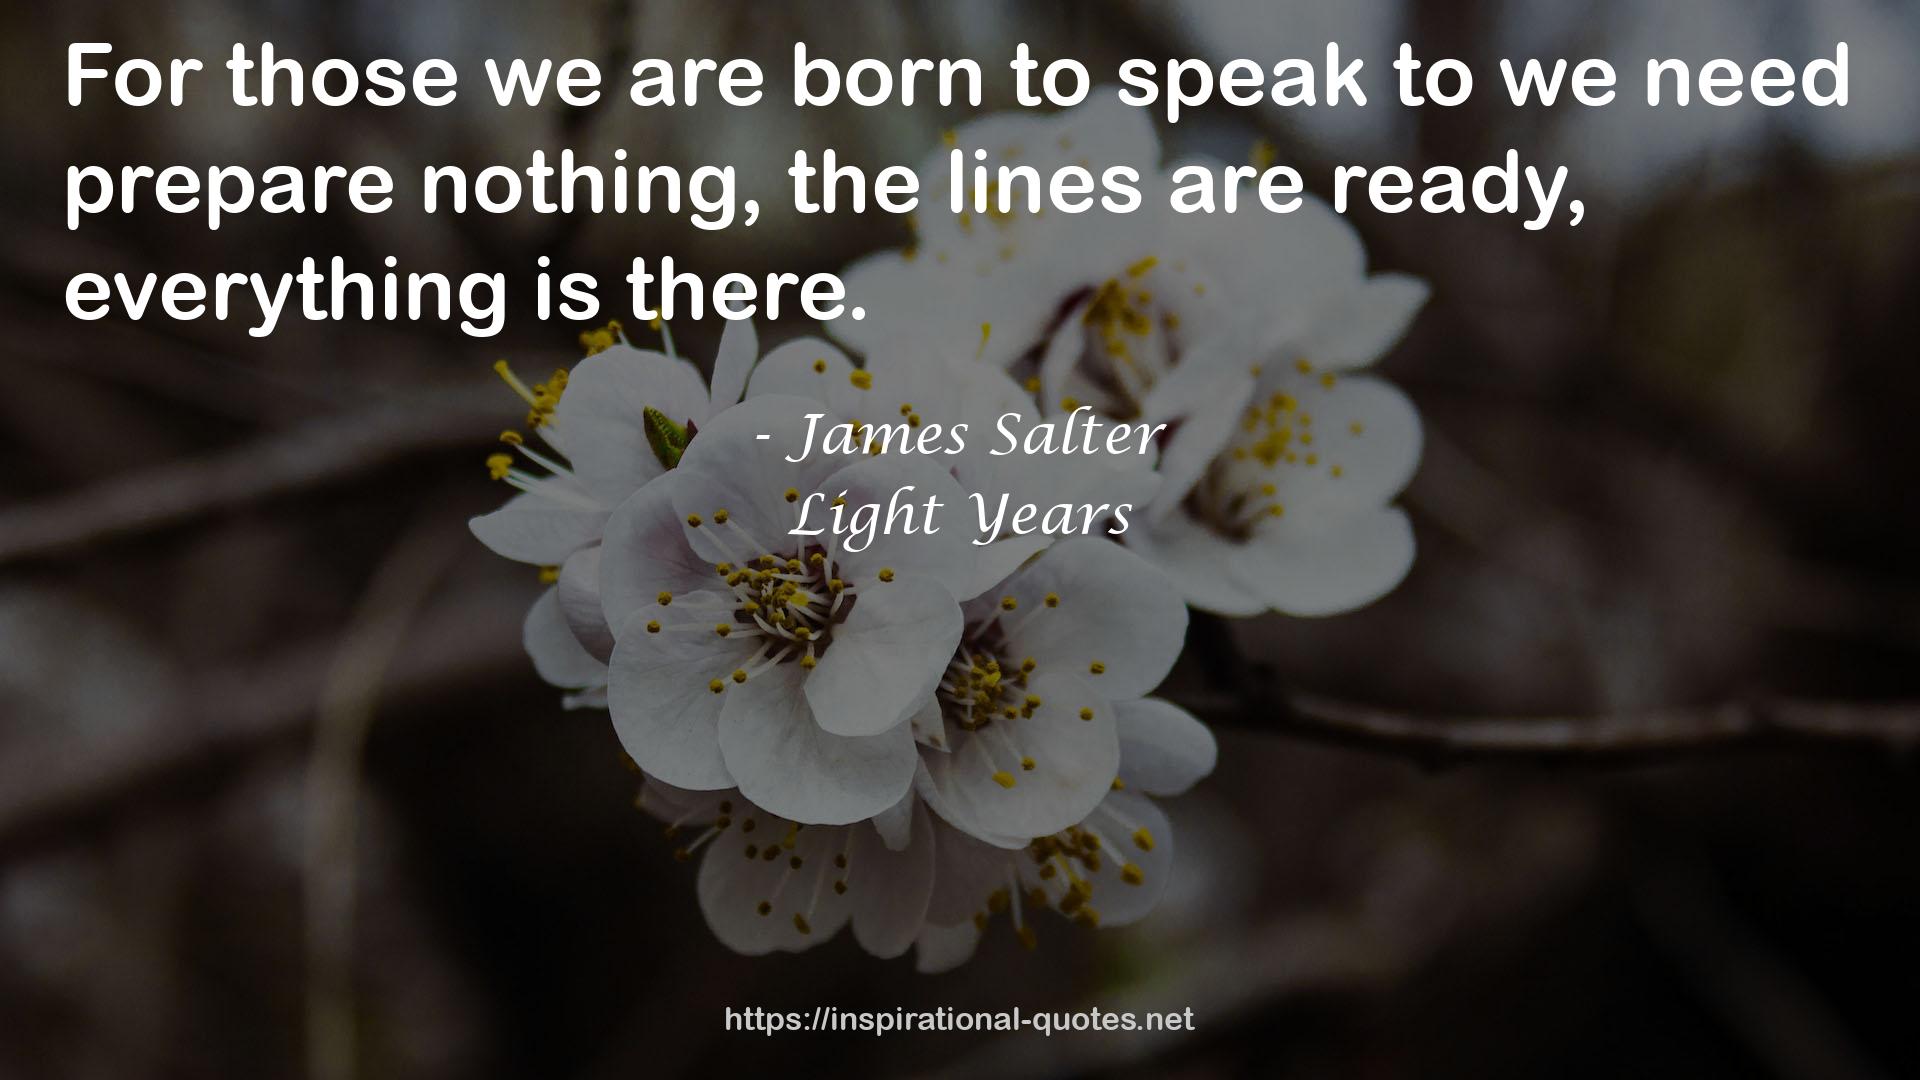 James Salter QUOTES